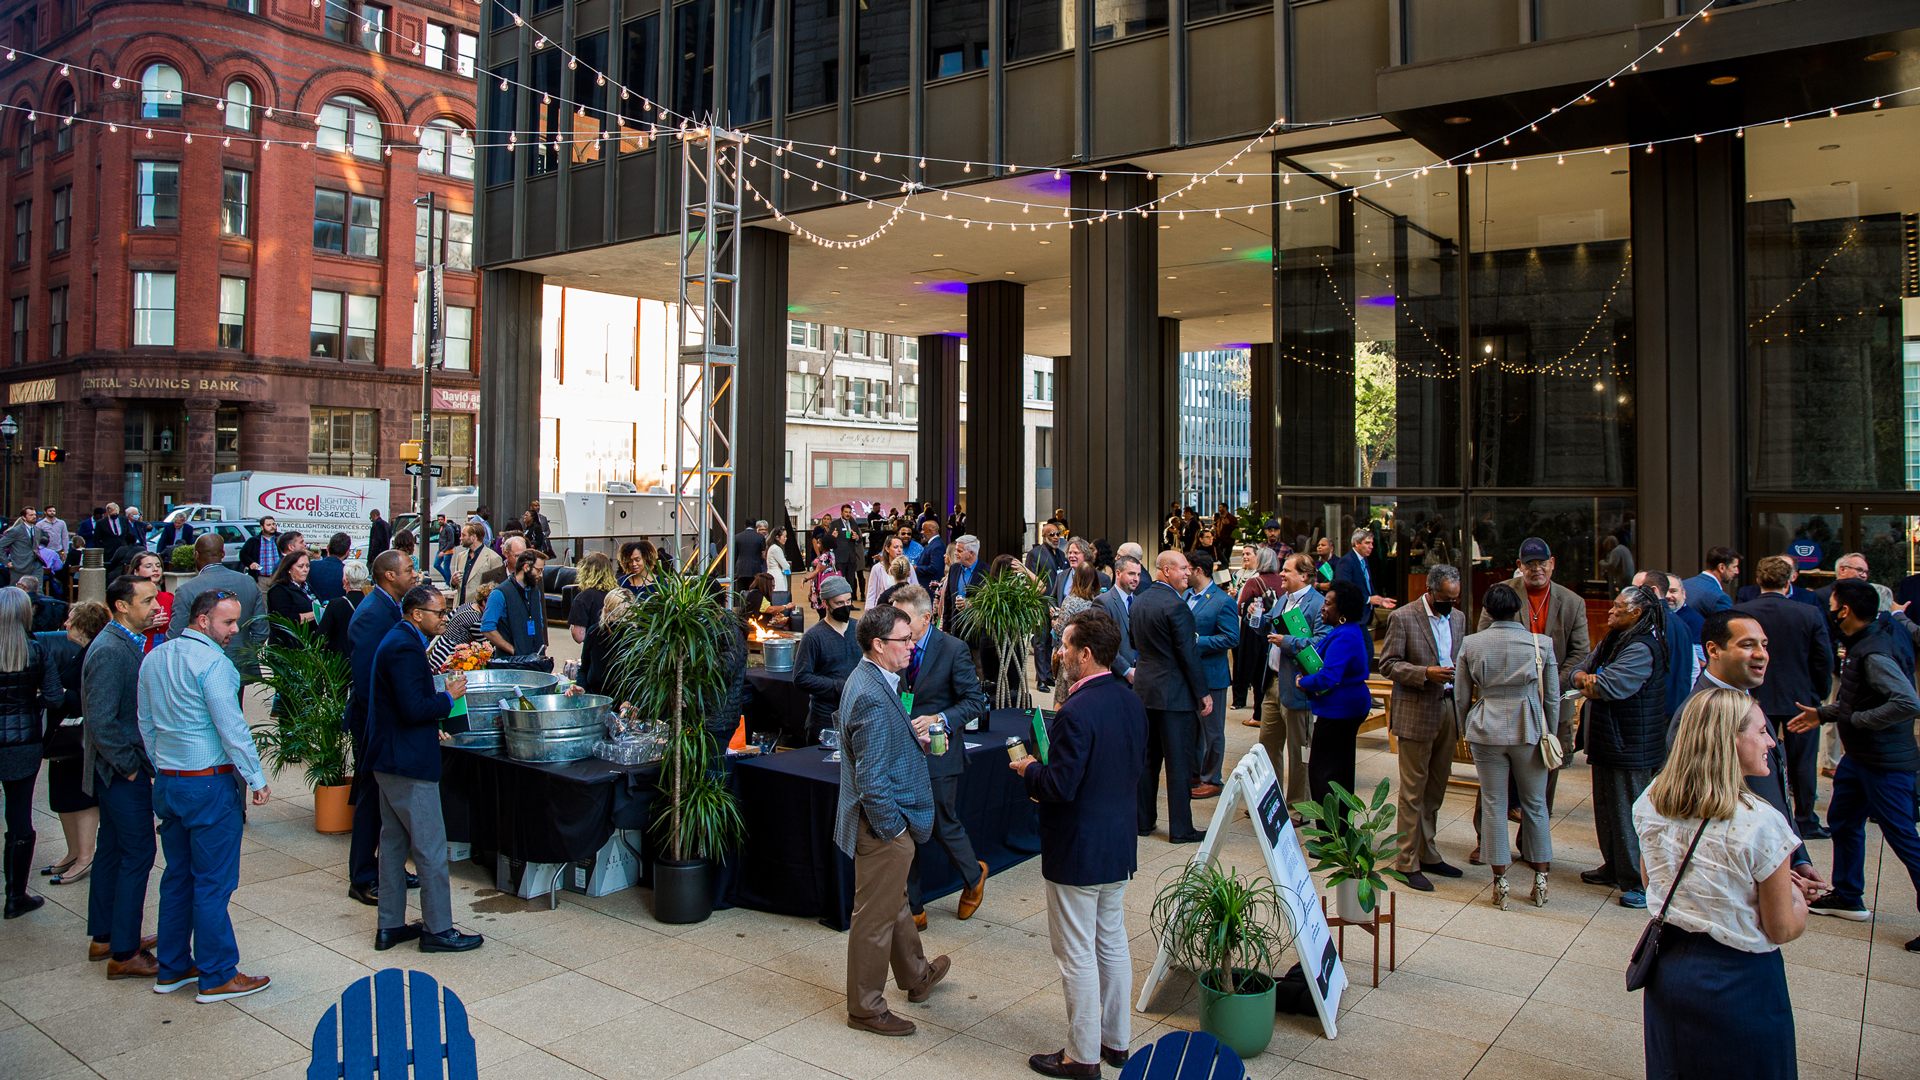 Crowd gathered outside of 100 N Charles Street for Downtown Partnership's 2021 Annual Meeting Event where we celebrate the release of our 2021 Annual Report.